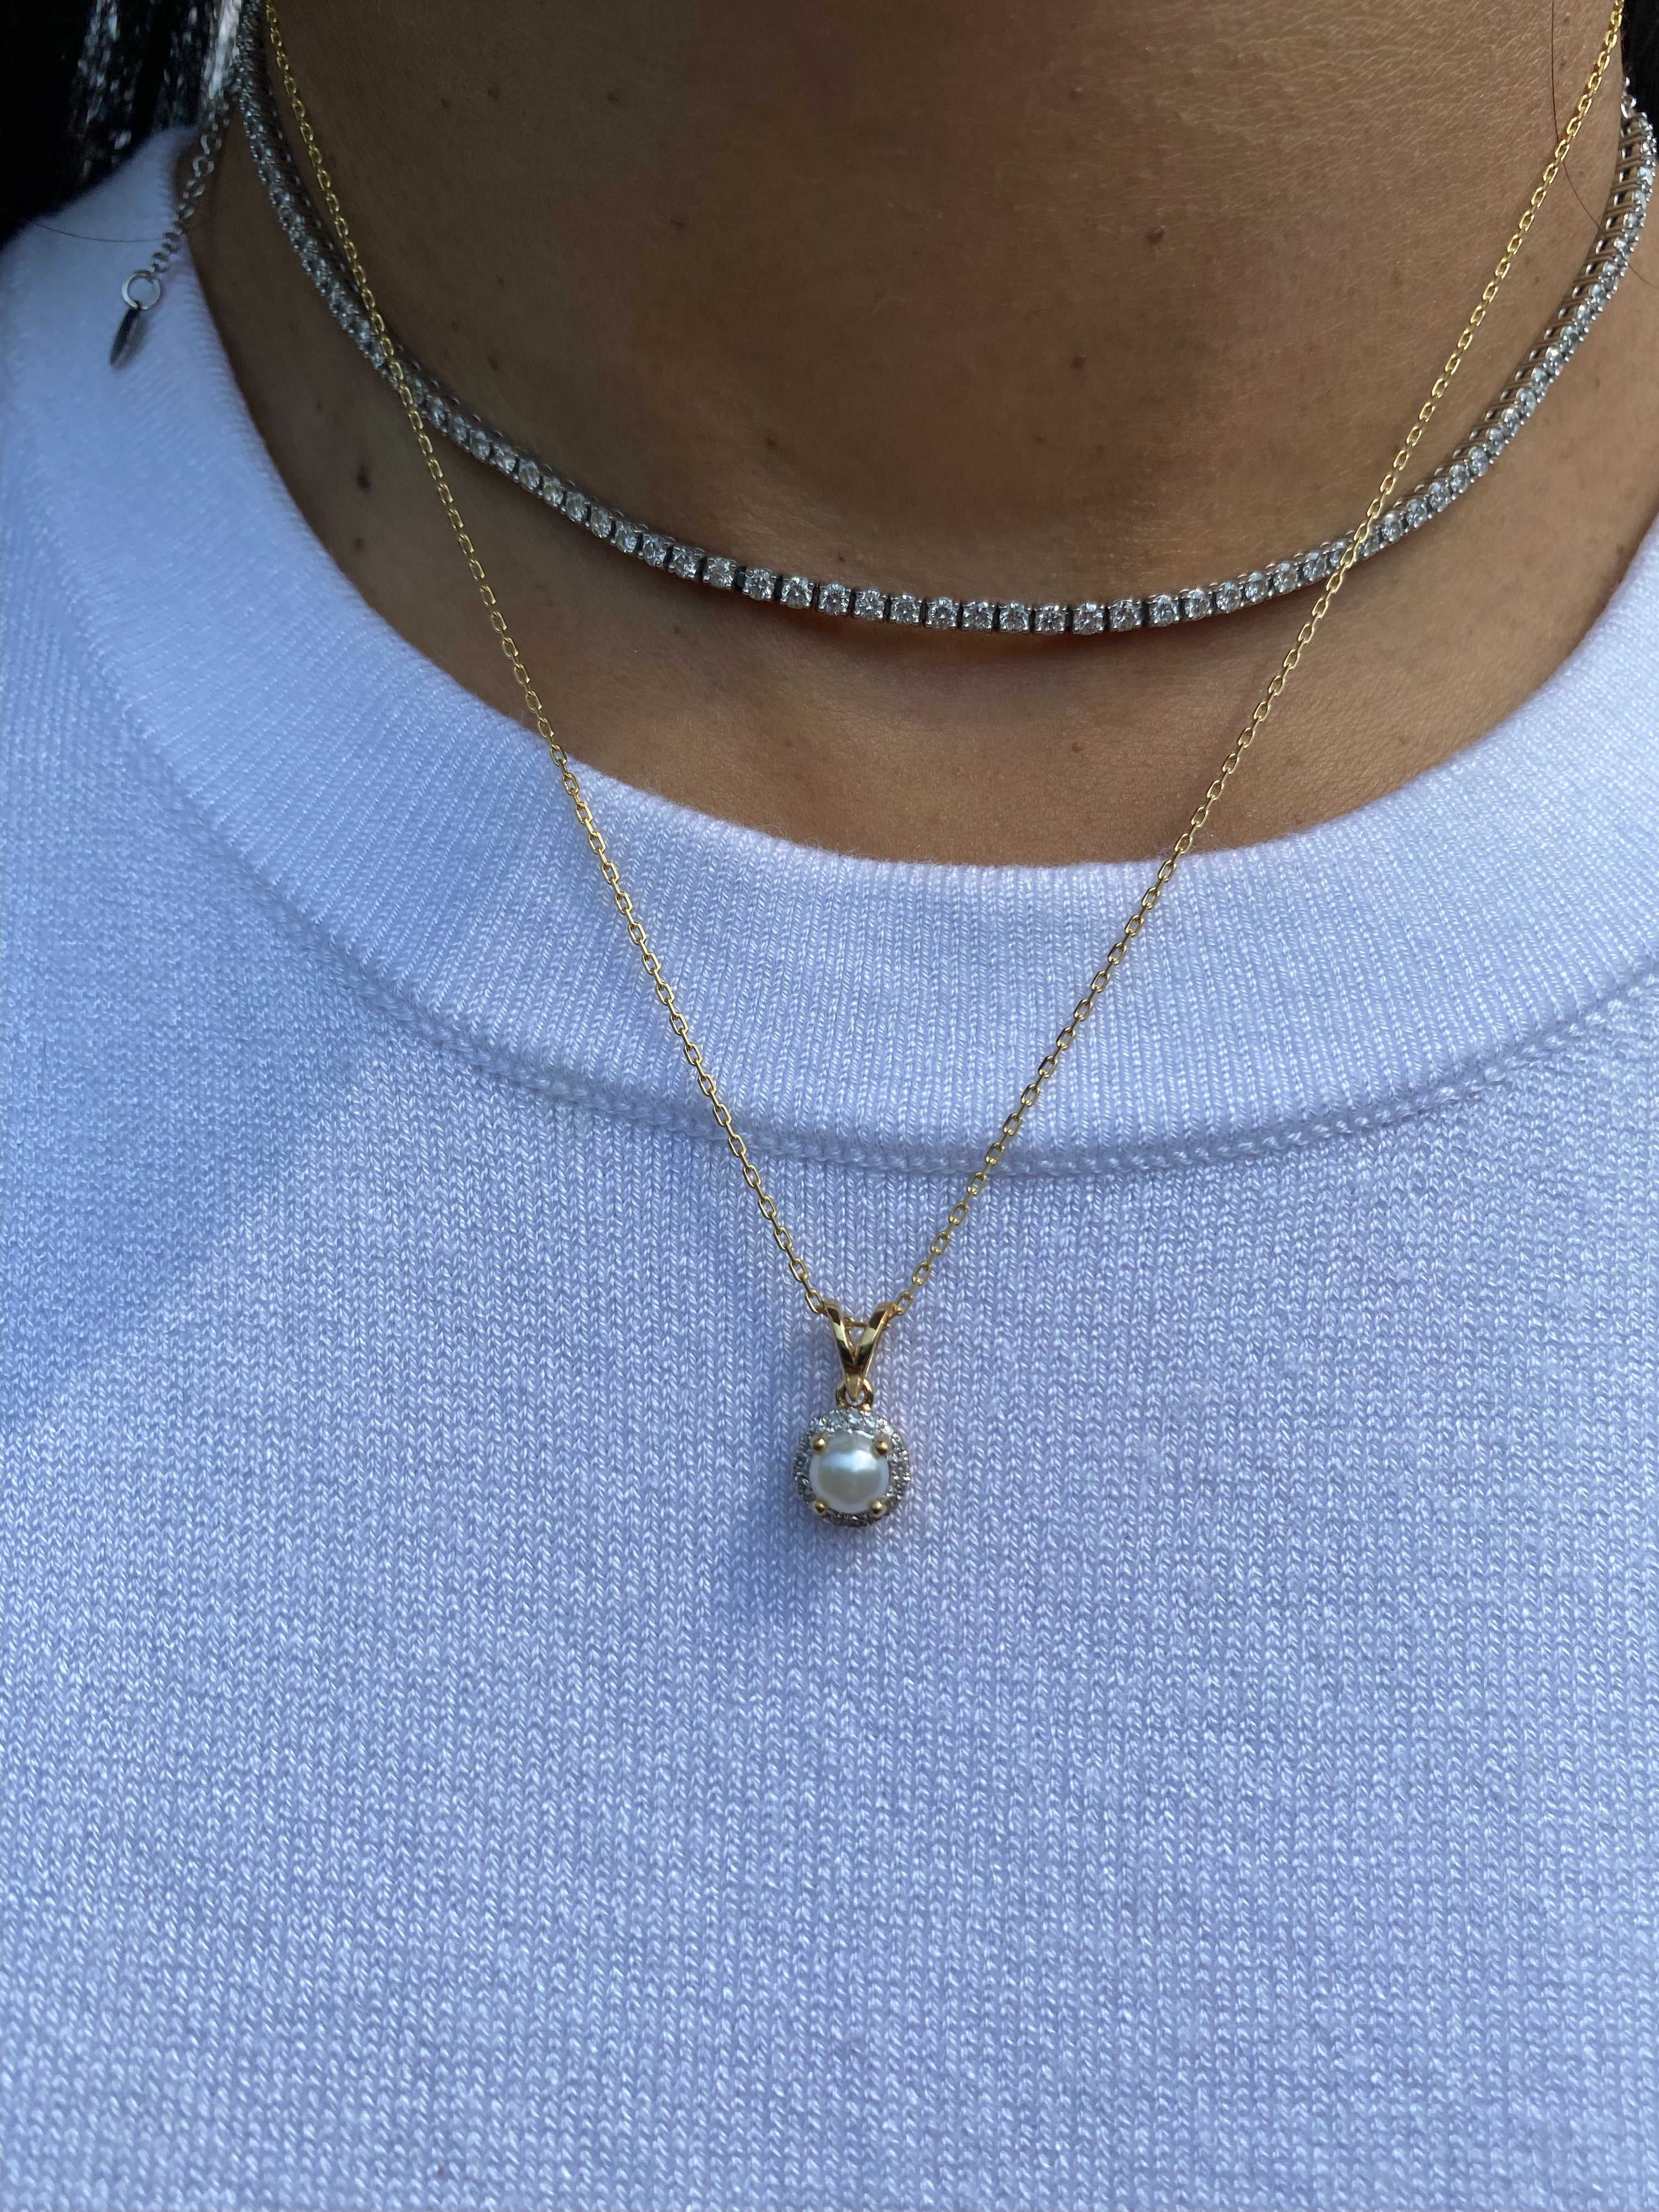 Pearl Gemstone Pendant with Chain